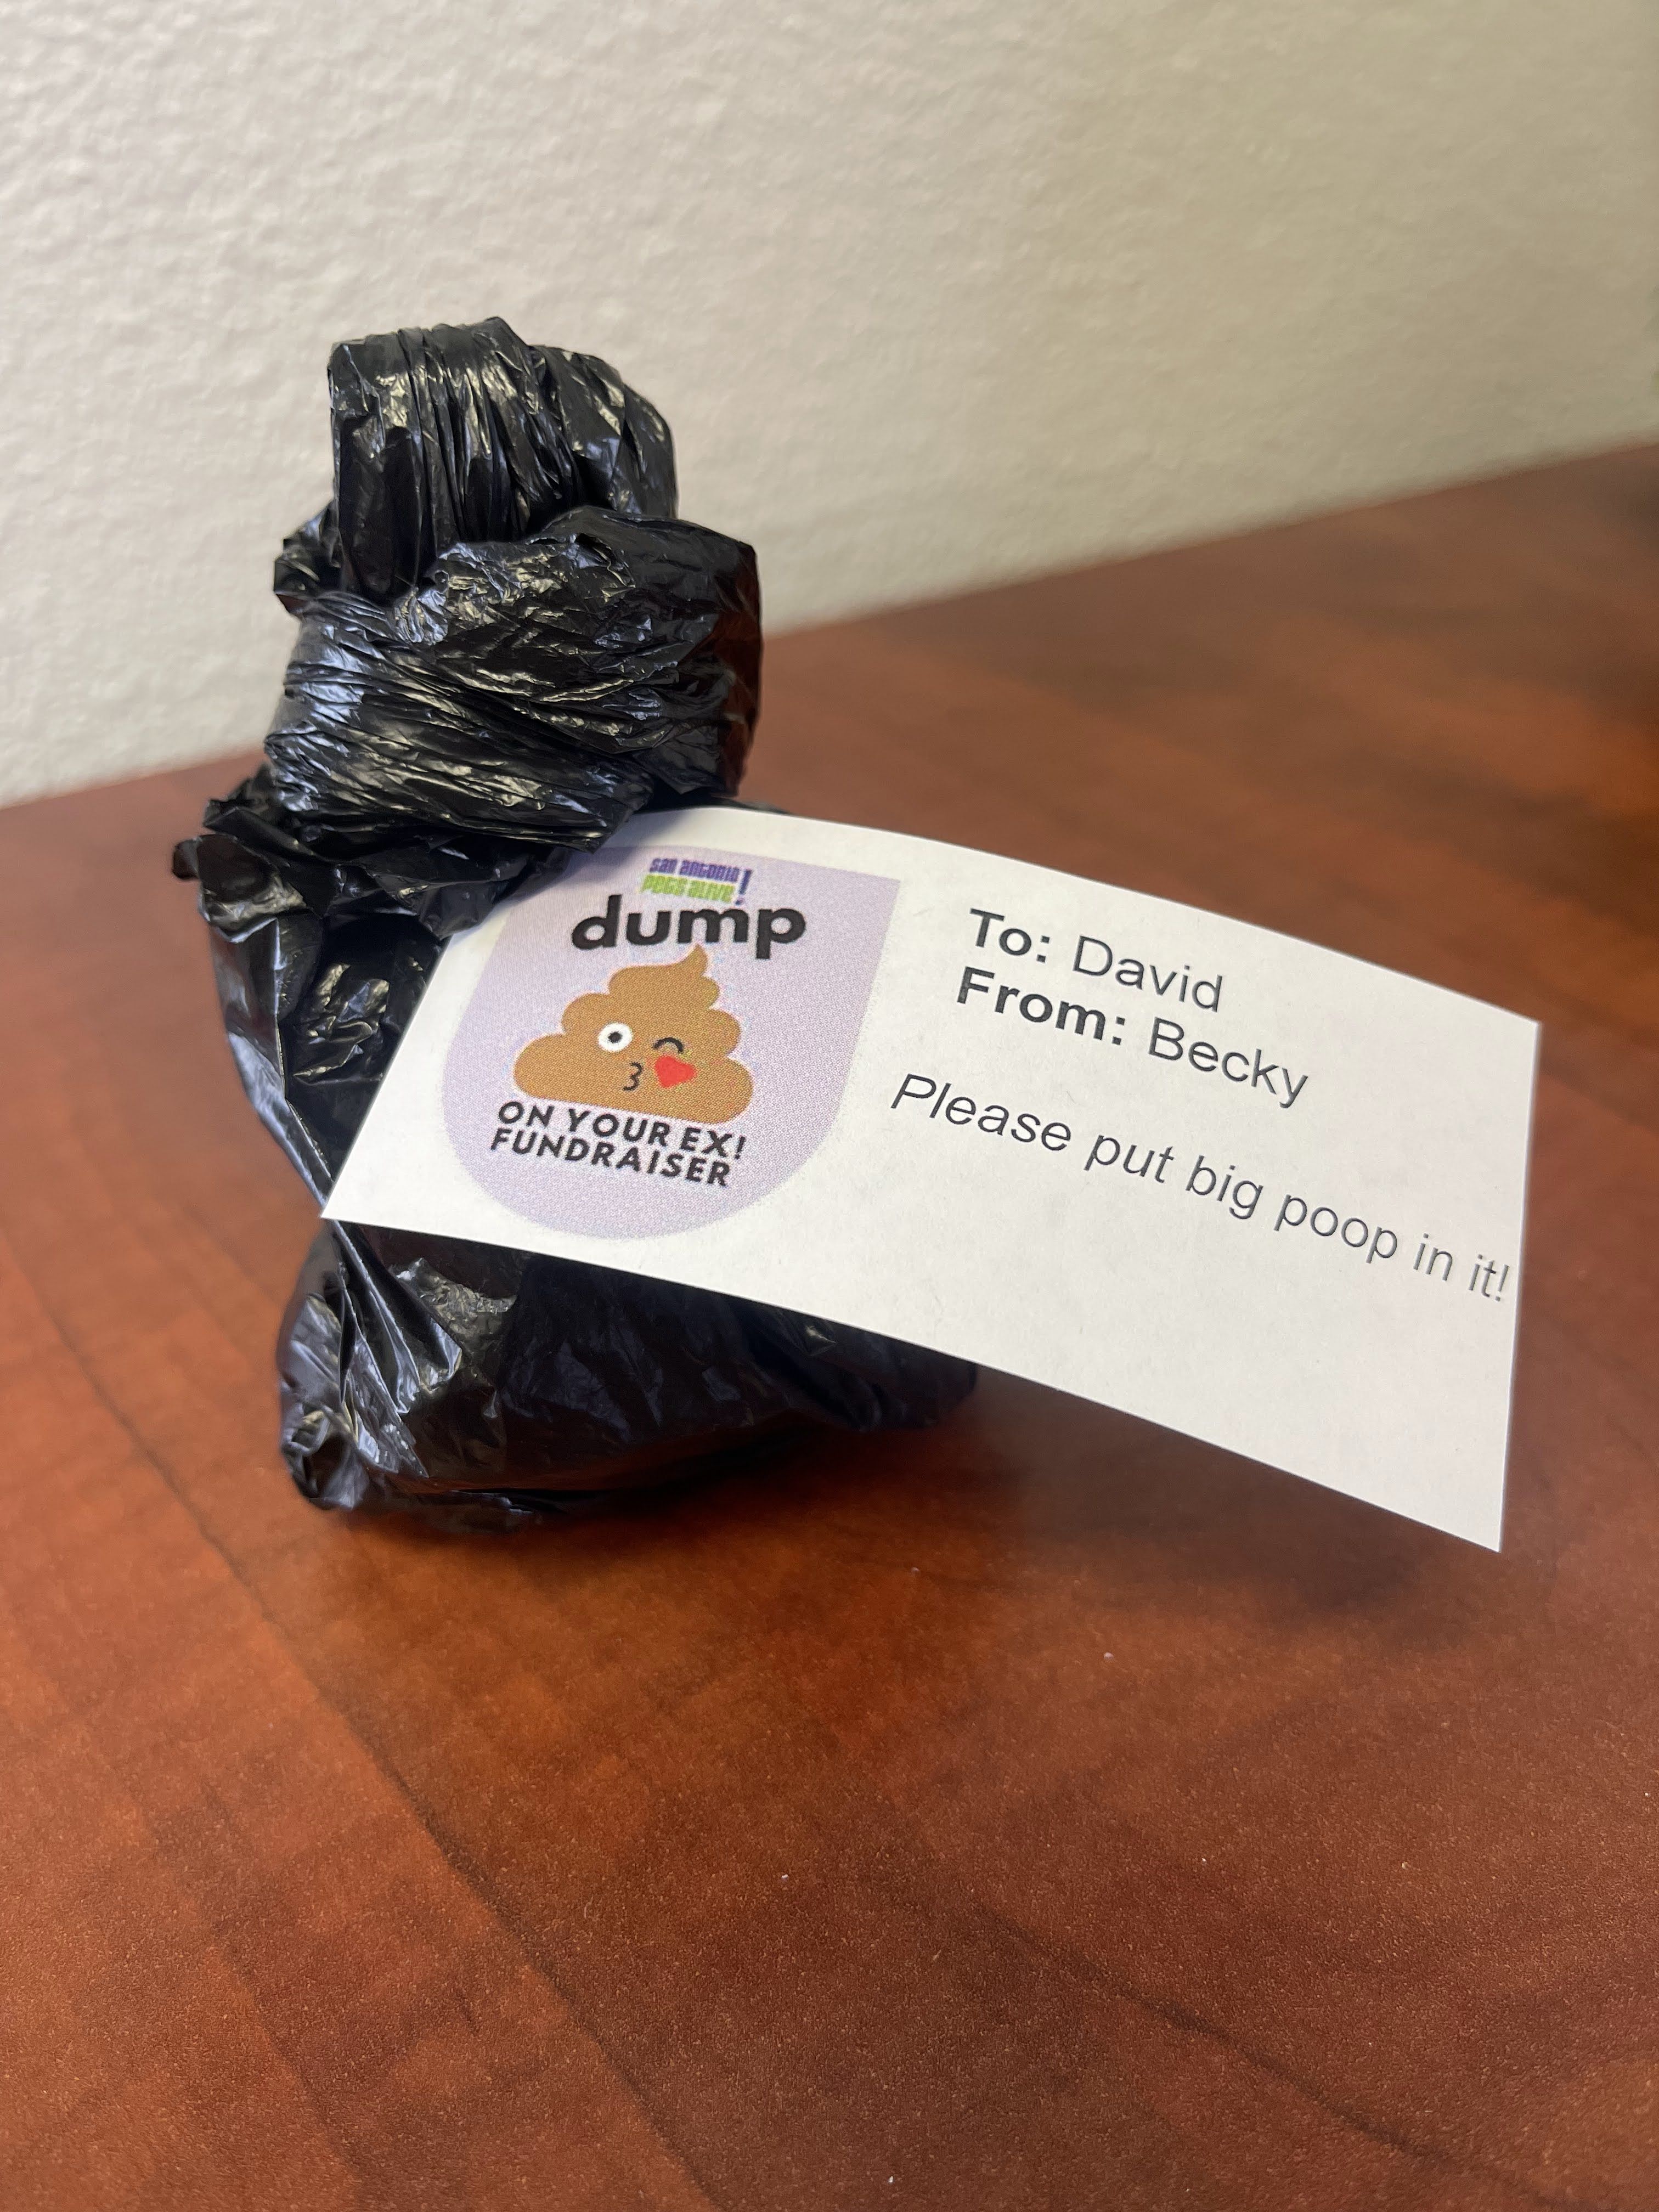 Dump On Your Ex Fundraiser - gallery image